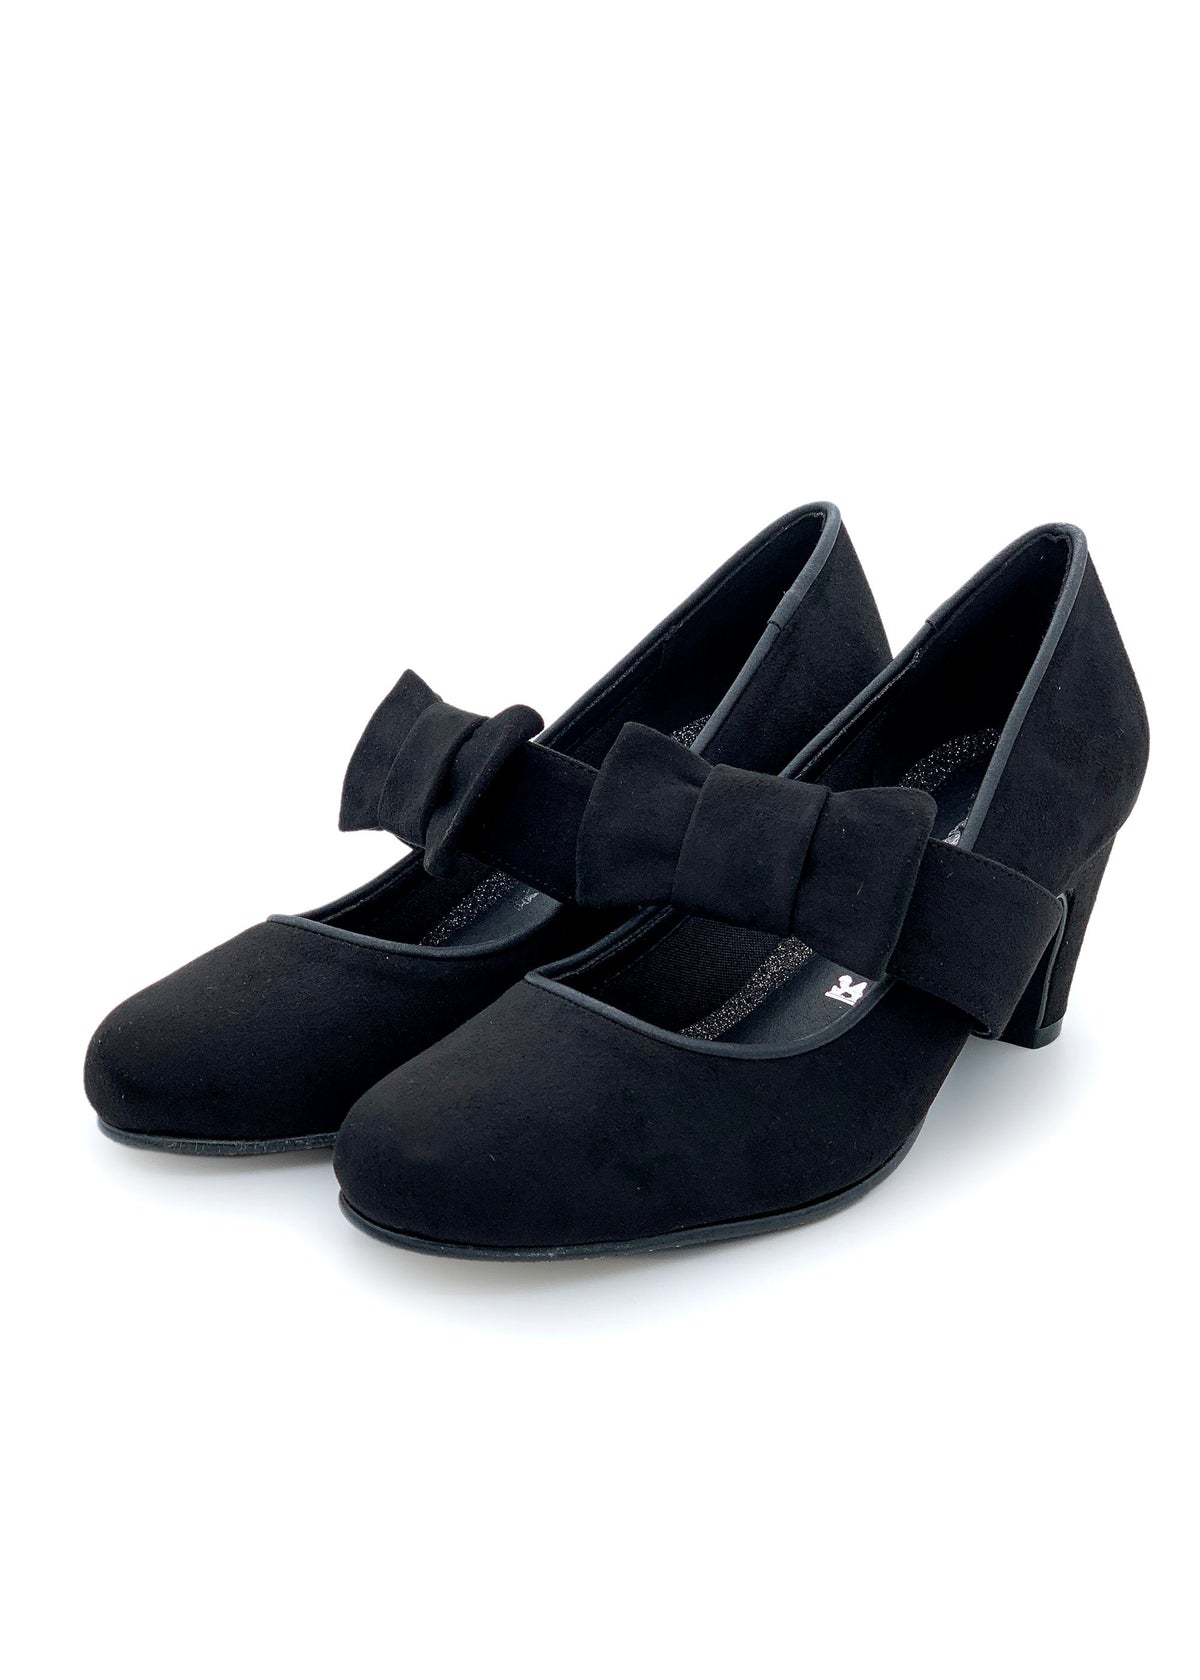 Open-toed shoes with bow straps - black